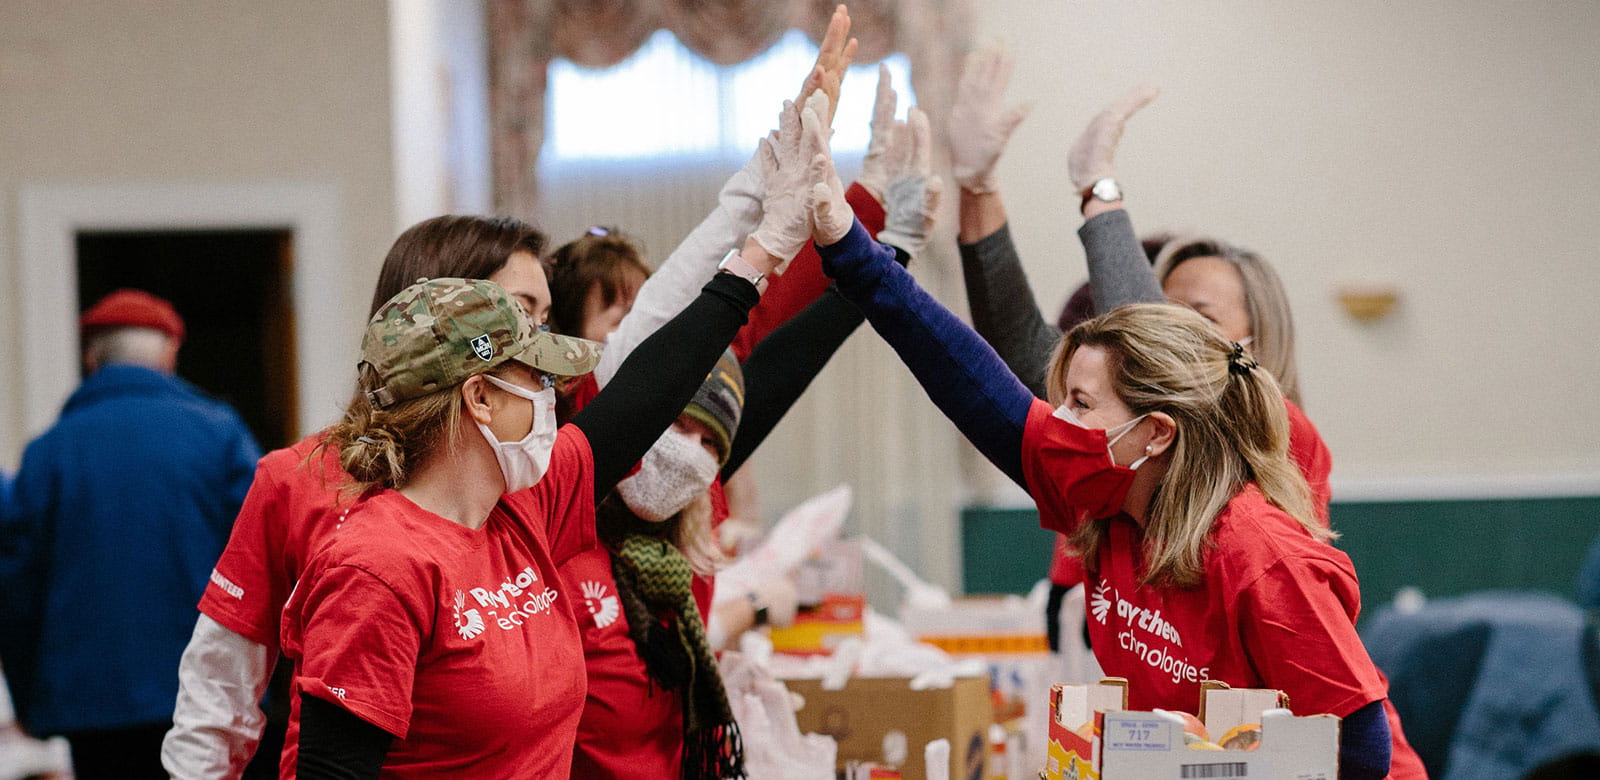 Raytheon Technologies employees giving high-fives